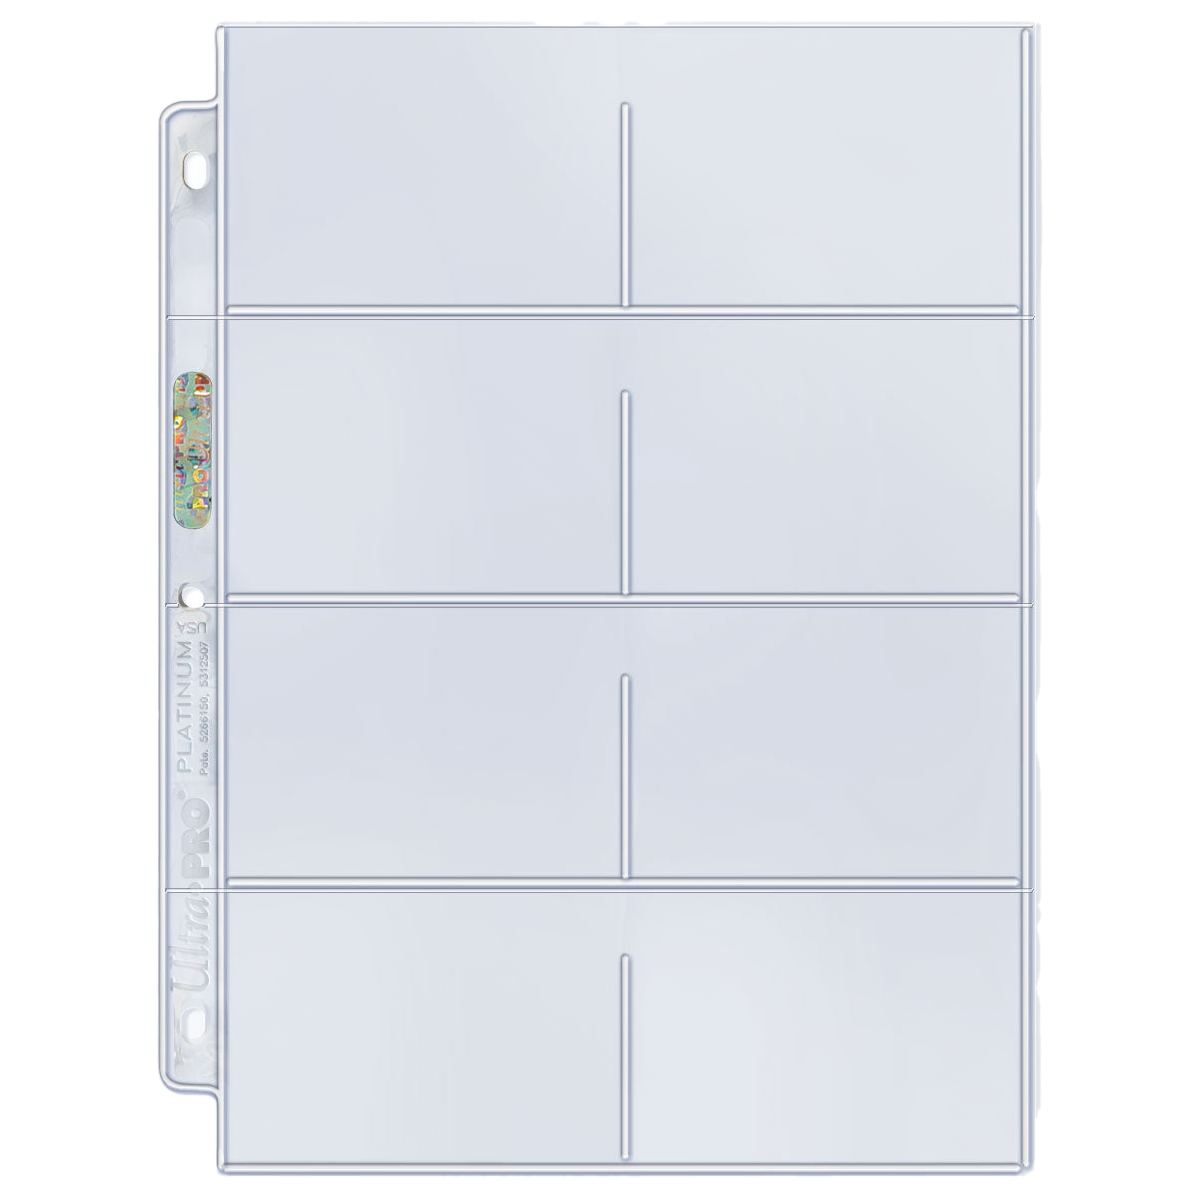 Platinum Series Pocket Pages (100ct) for Cards and Photos